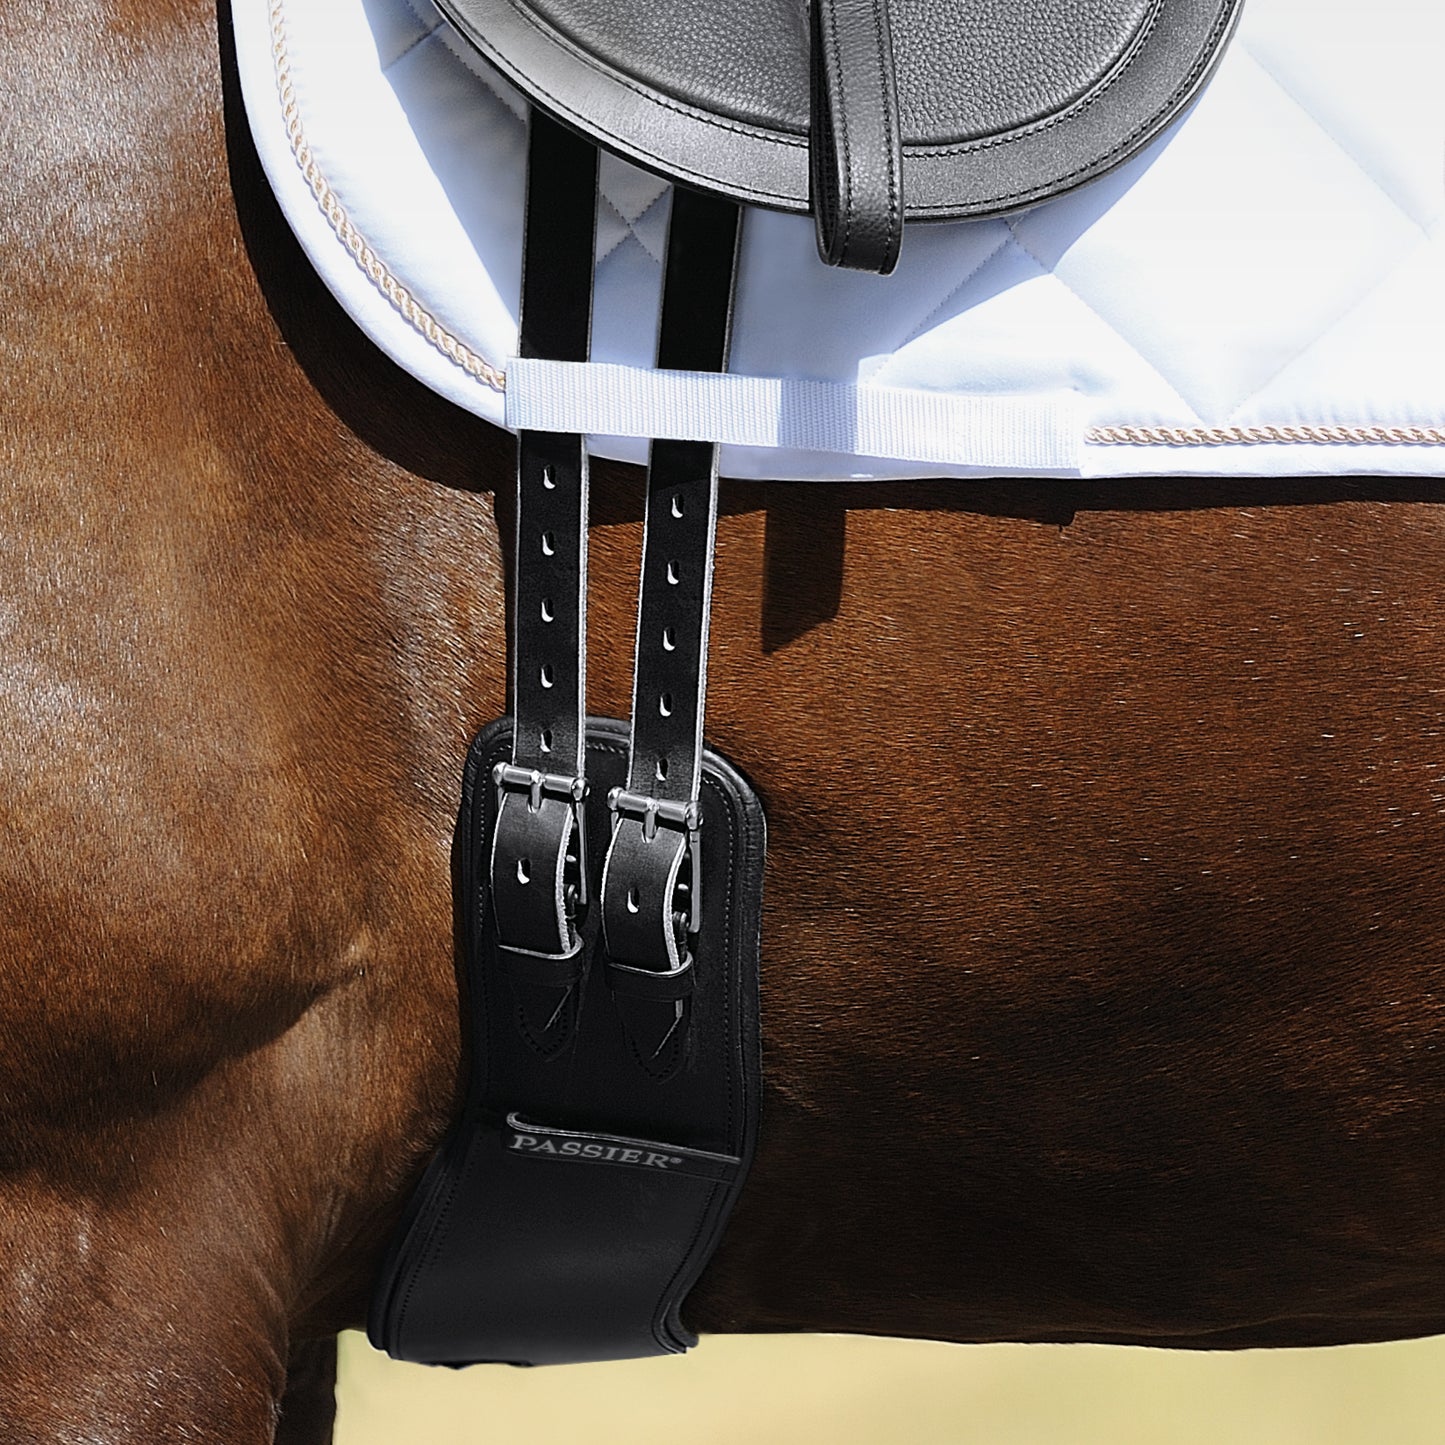 Leather Saddle Girth for Dressage Saddles with a Tendency to Slip Forward | Passier®